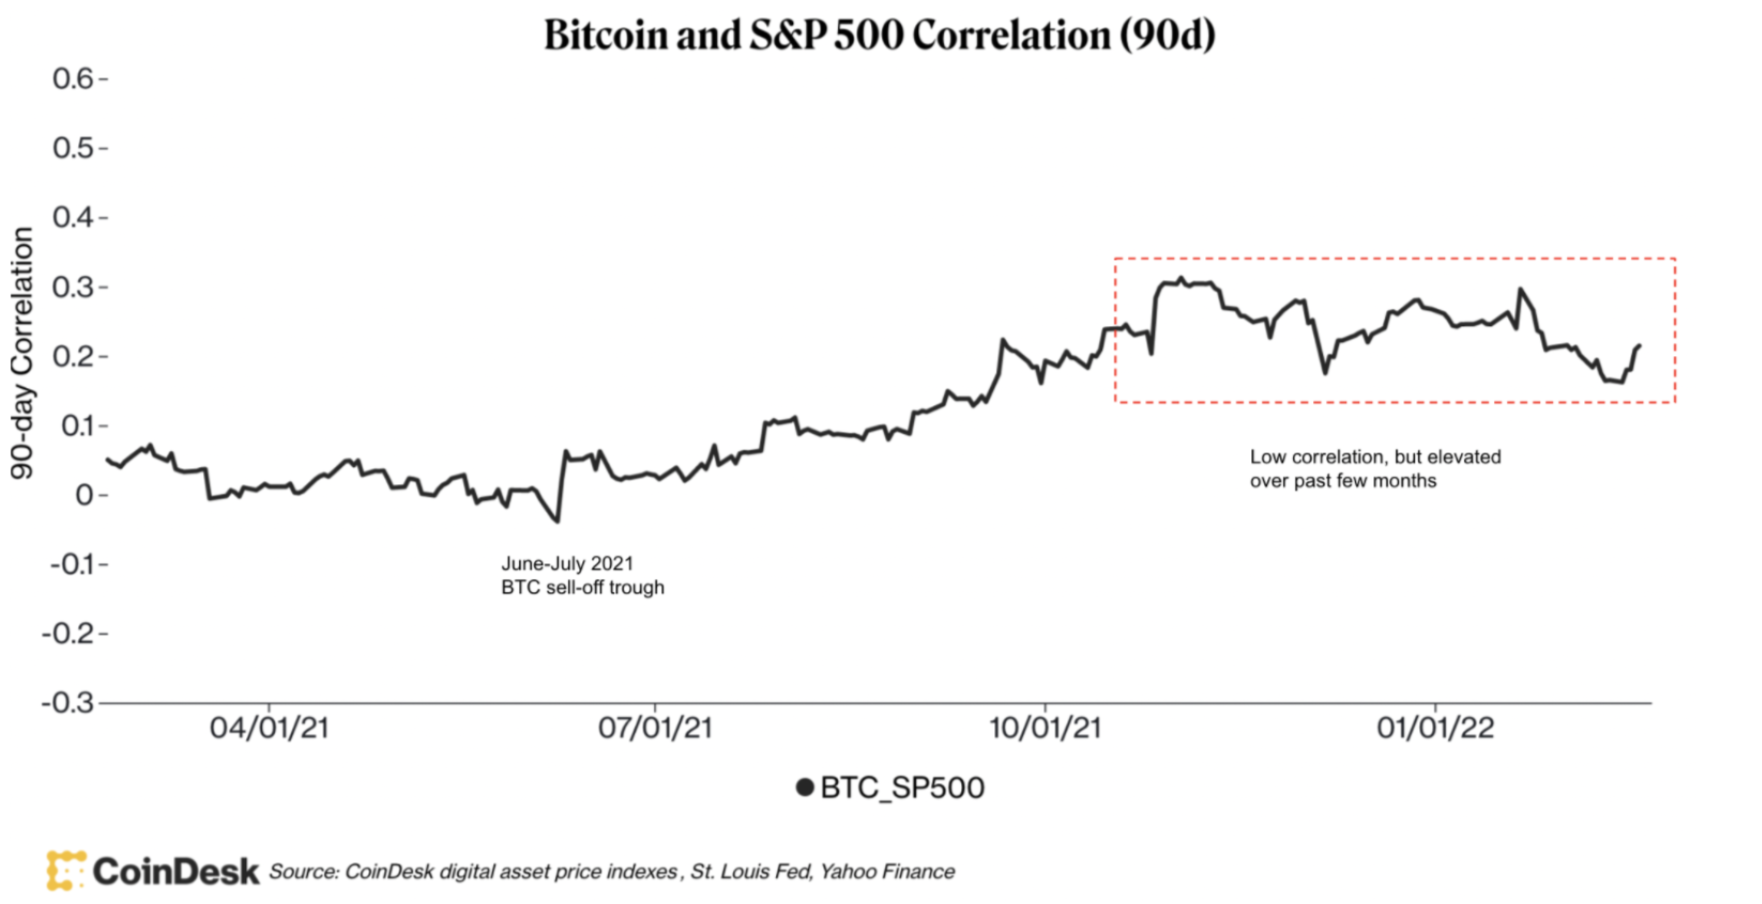 Bitcoin and S&P 500 correlation (CoinDesk digital asset price indexes, St. Louis Fed, Yahoo Finance), source: https://www.coindesk.com/